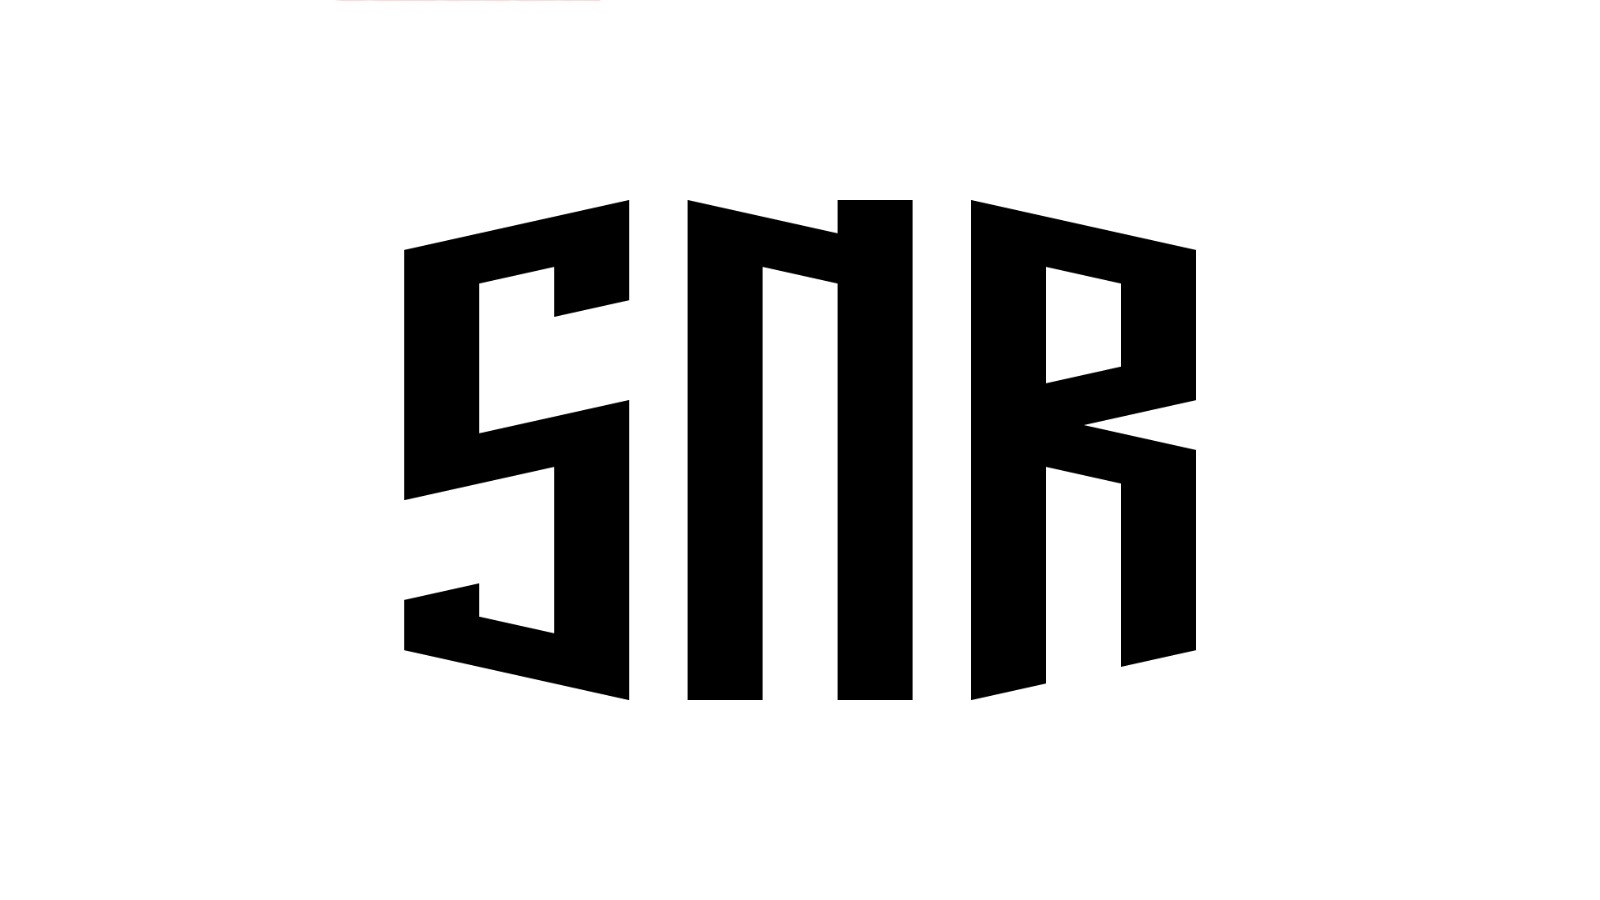 snrstore